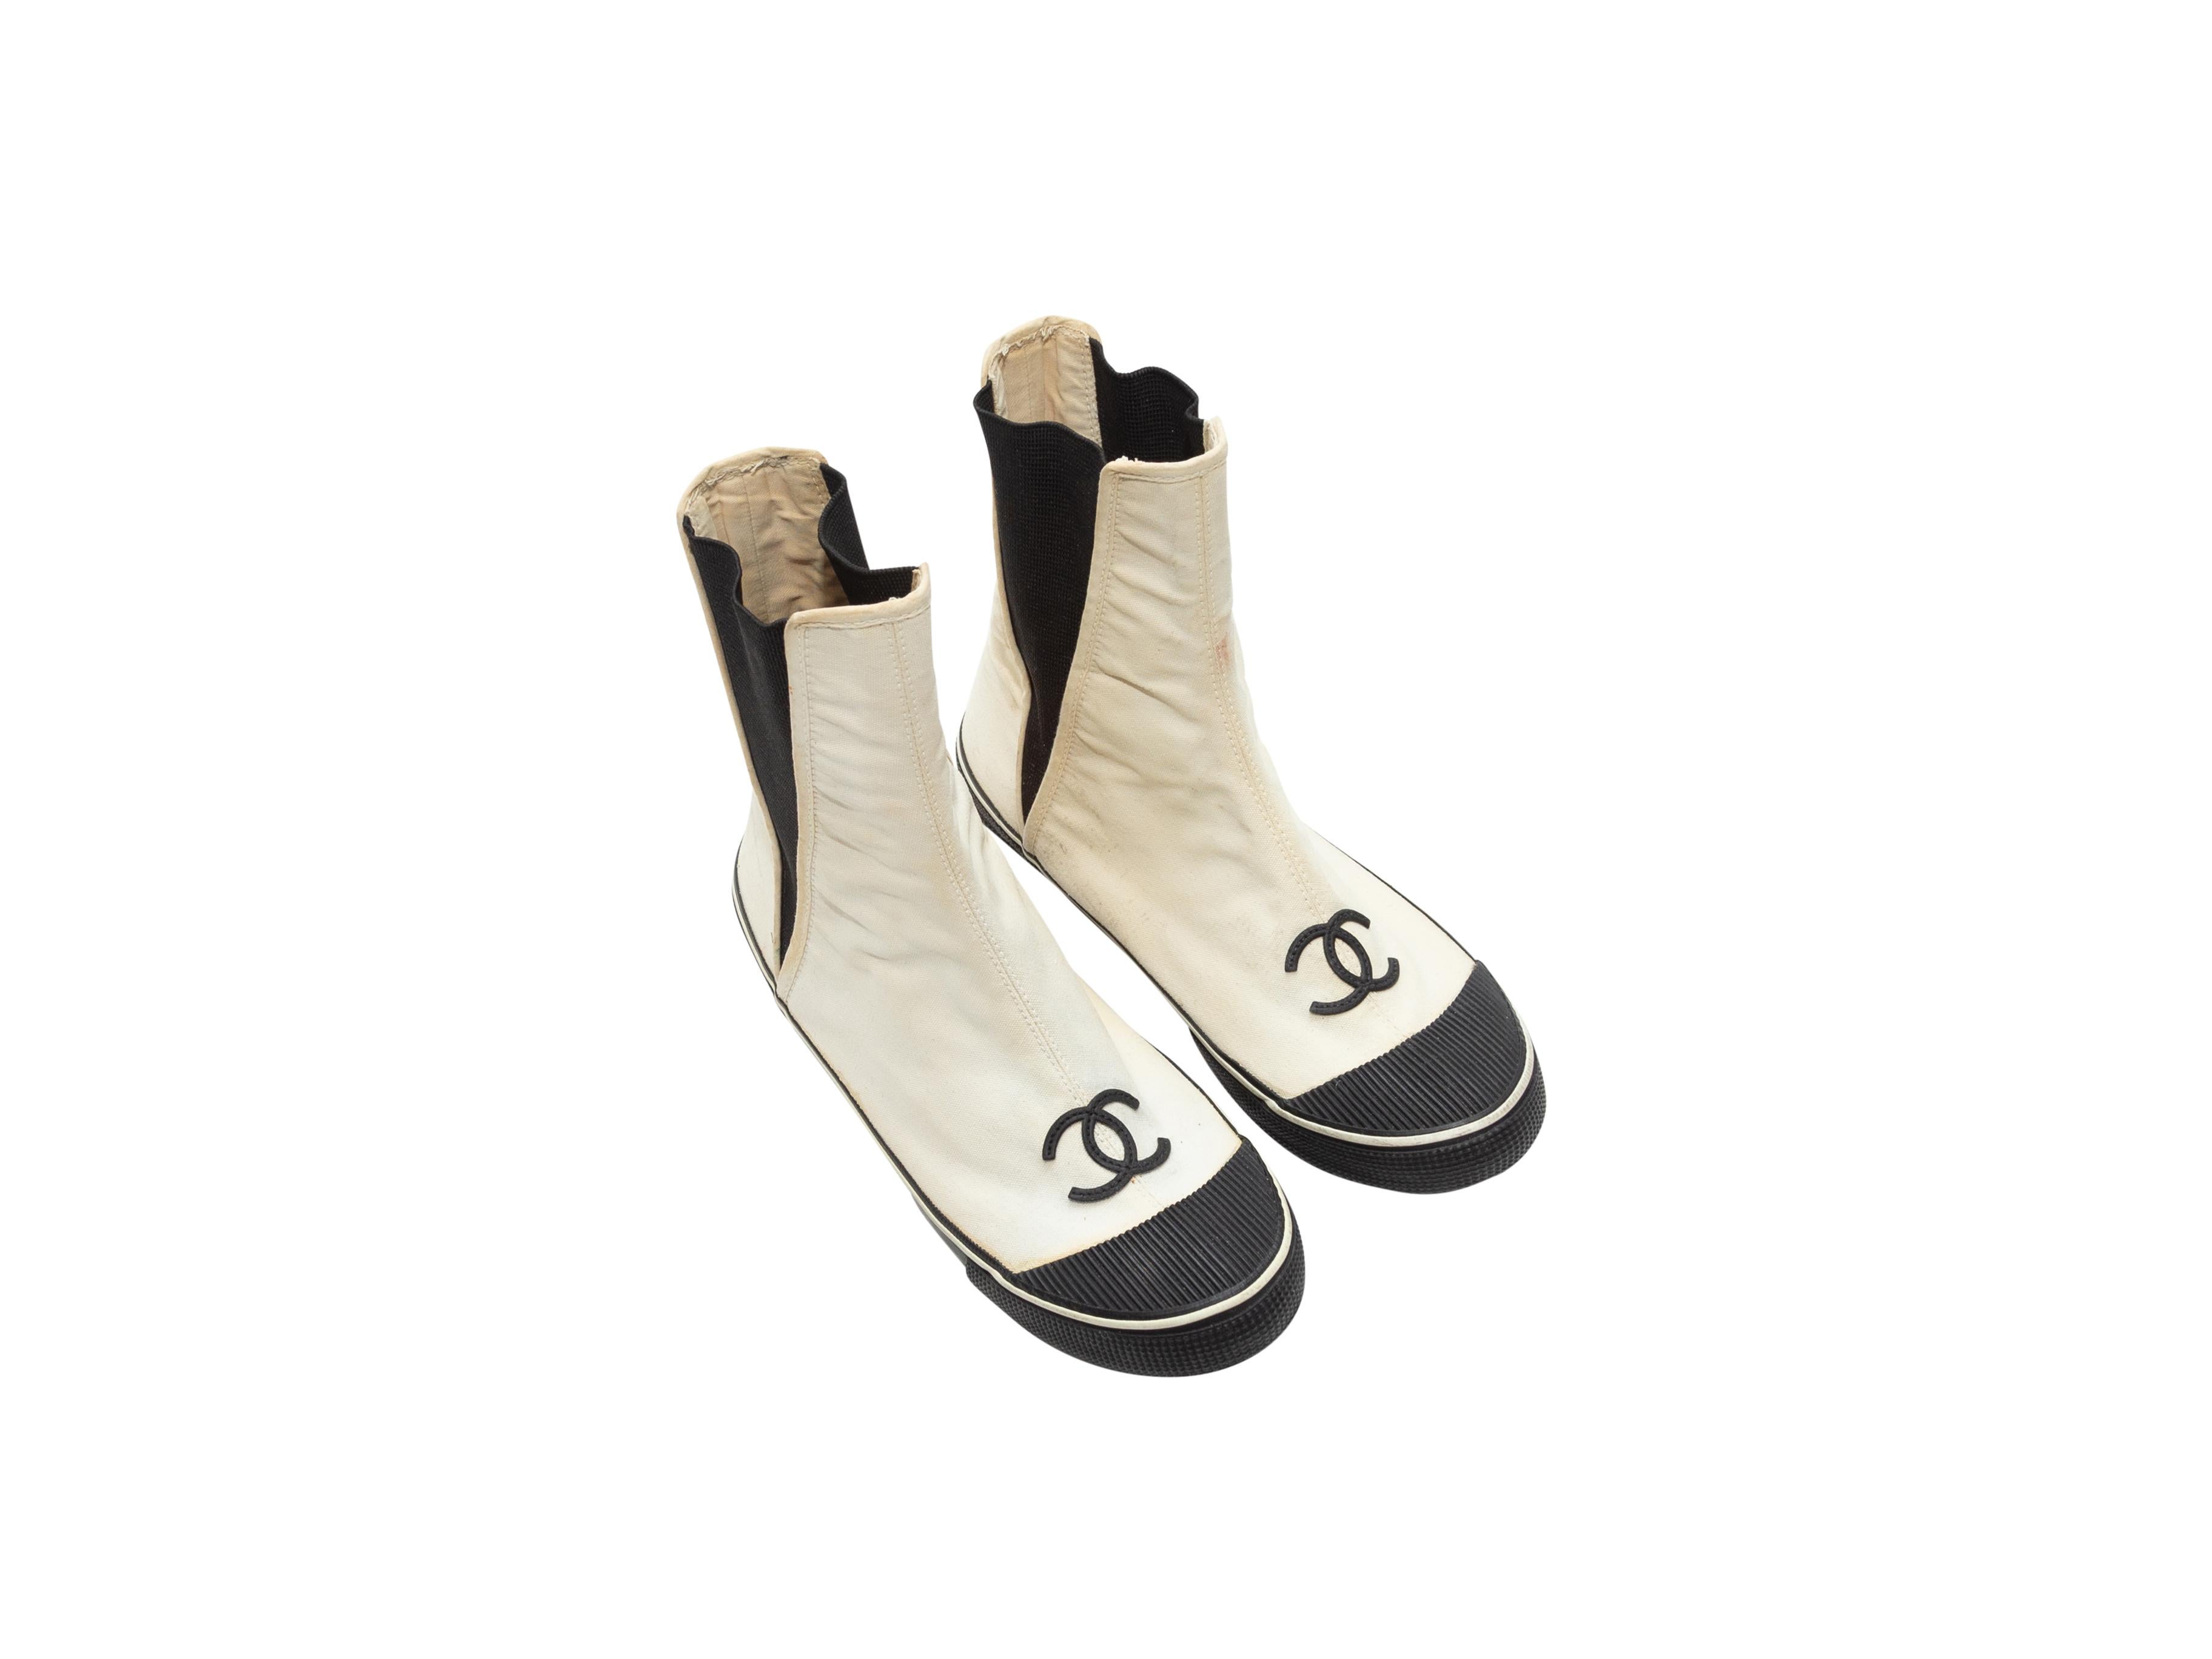 Product details: Vintage white canvas and black rubber flat boots by Chanel. Cap-toes. CC logos at toes. Elasticized side gores. Rubber soles. 4.5